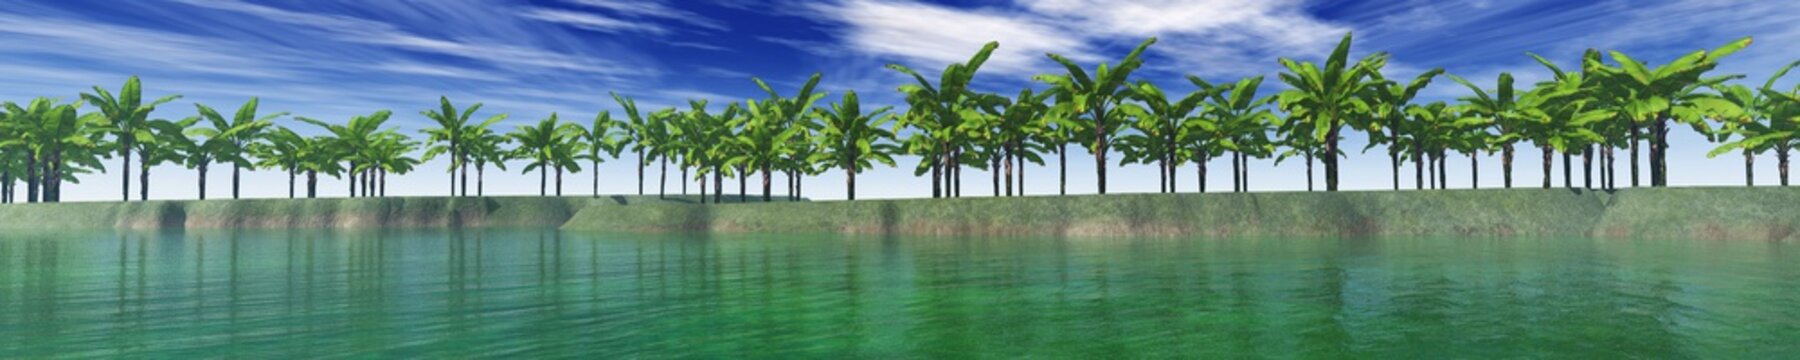 view of palm trees on the sea, an island in the ocean, palm trees in the ocean, tropical island